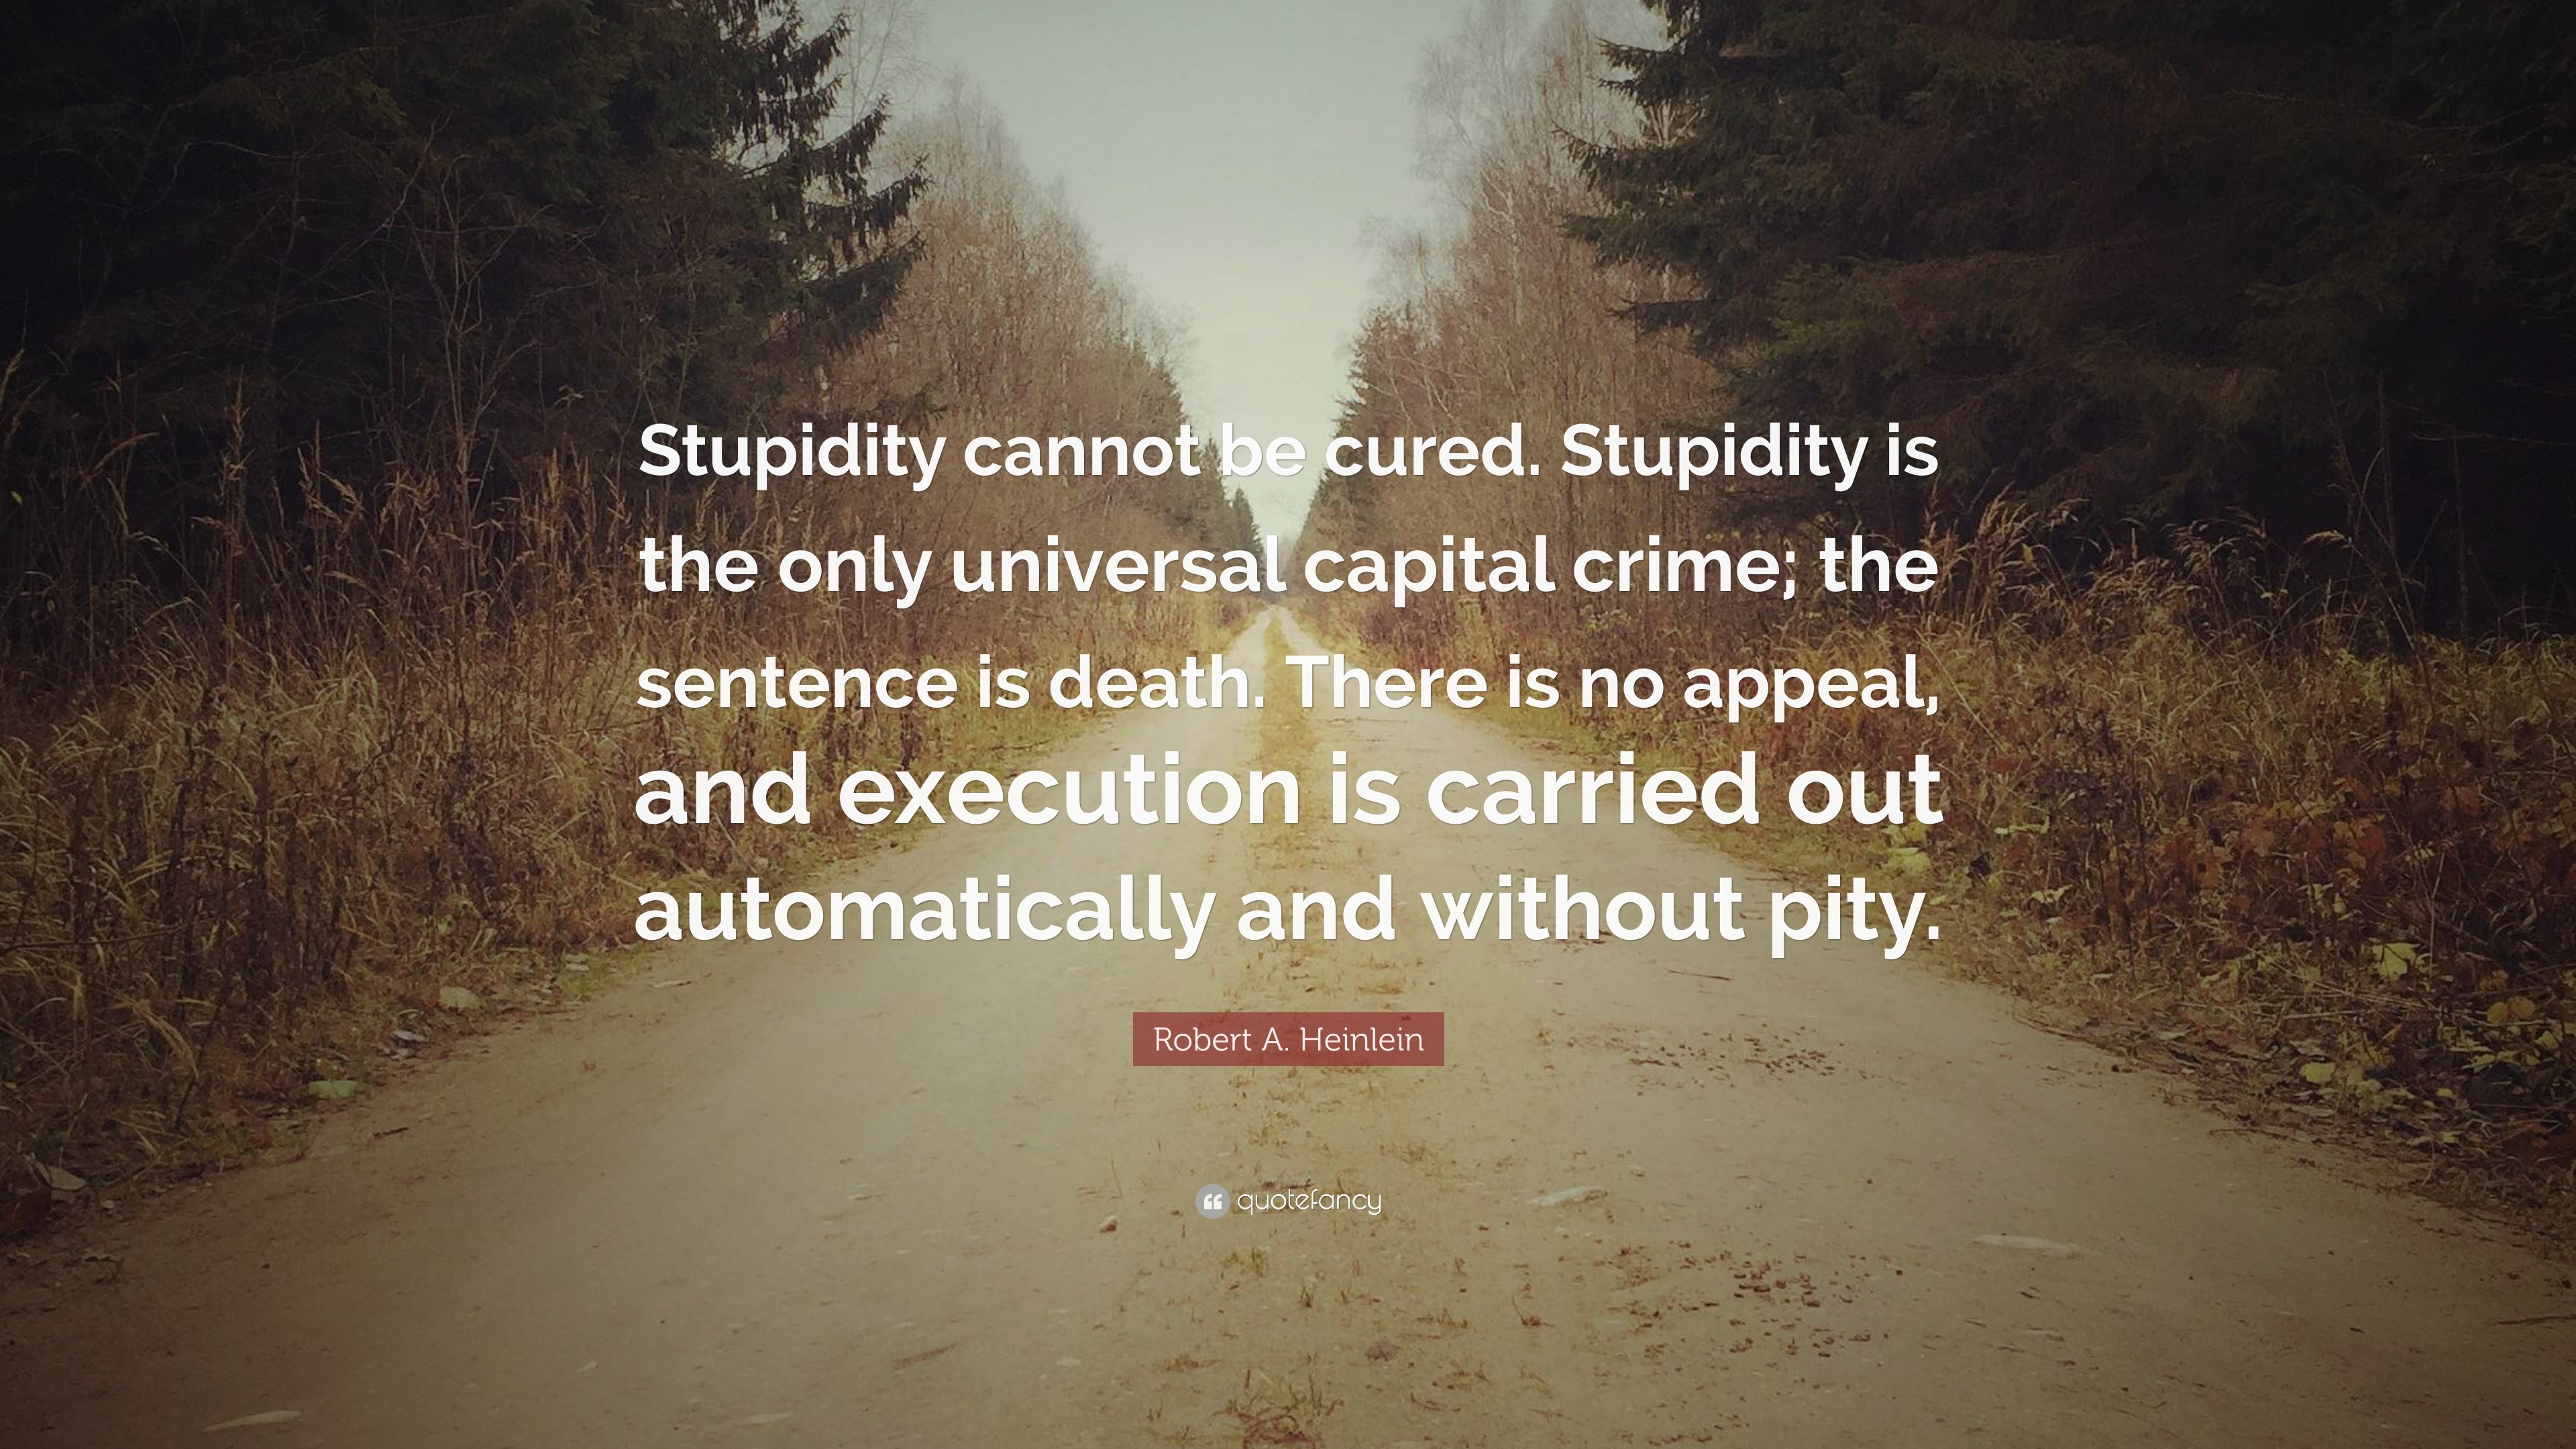 Robert A. Heinlein Quote: "Stupidity cannot be cured. Stupidity is the only universal capital ...